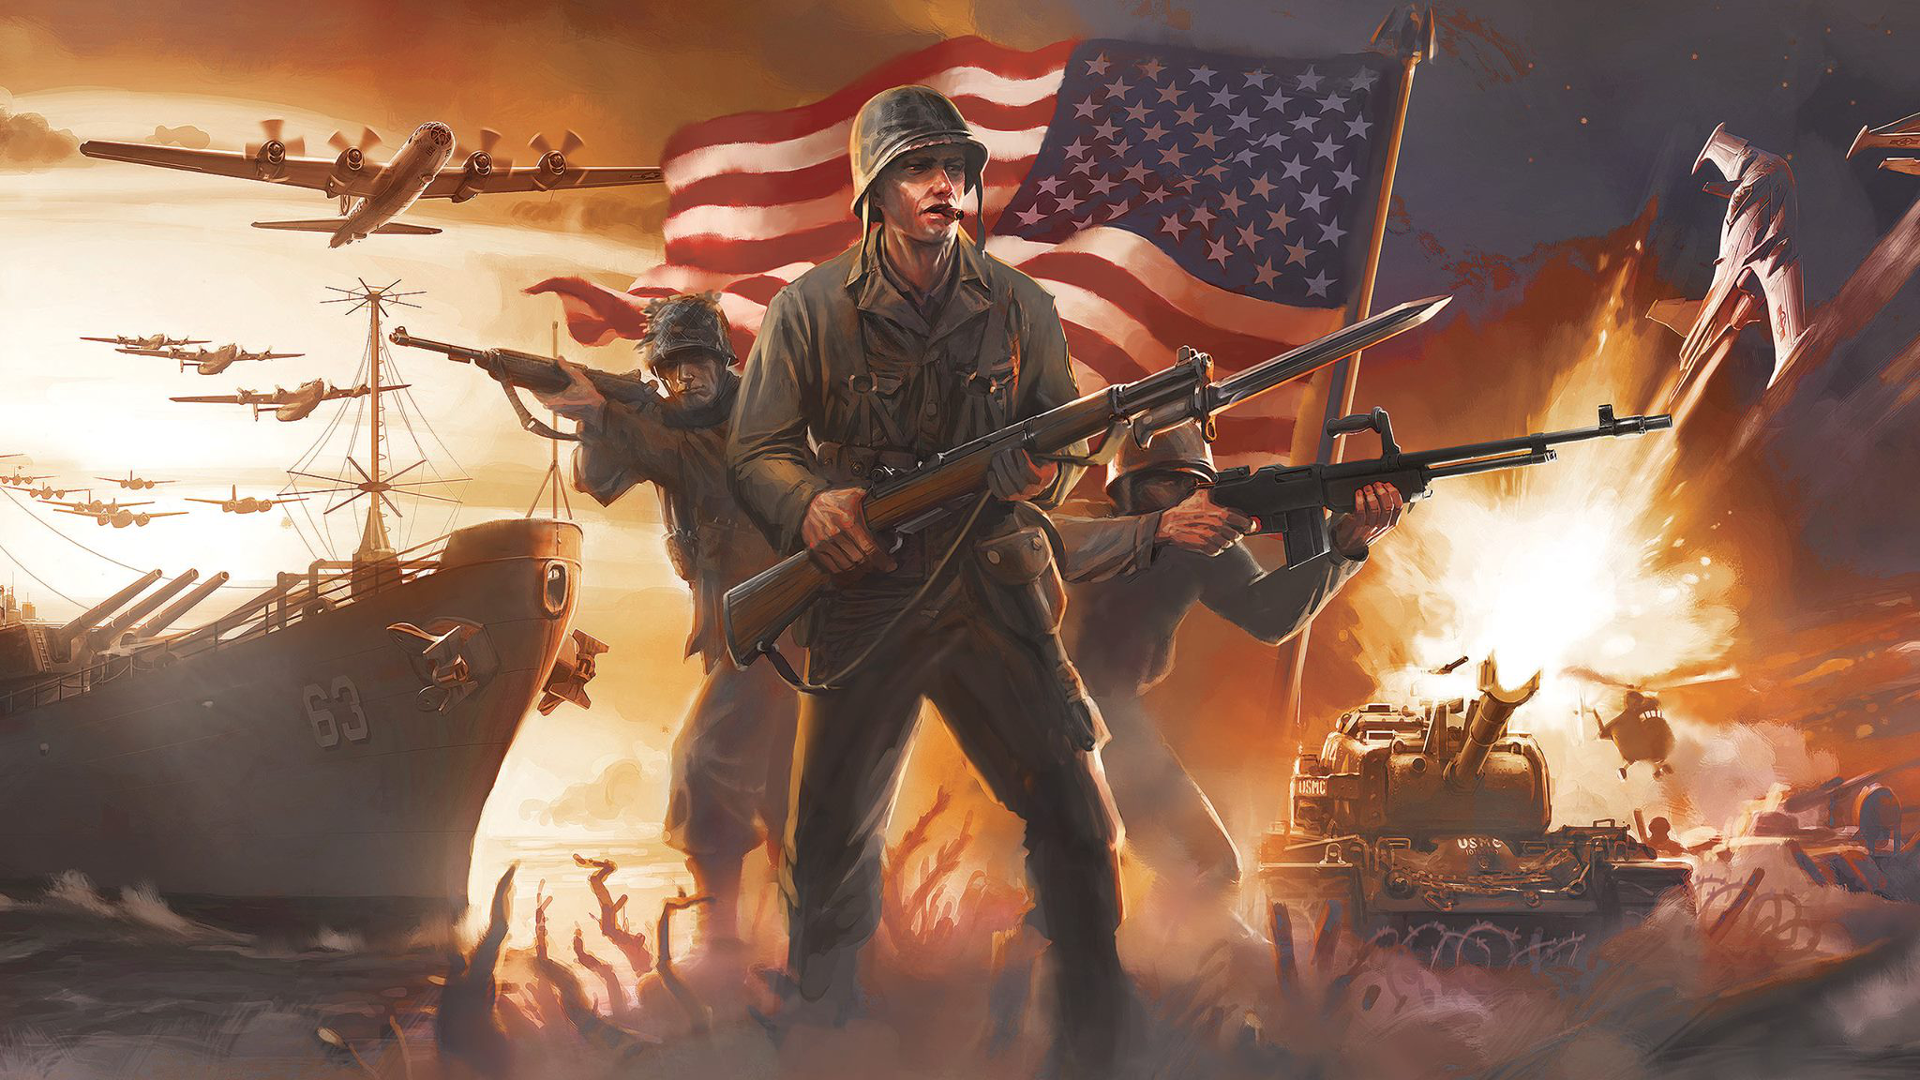 General 1920x1080 American flag tank military digital art gun boys with guns war flag standing soldier military vehicle cigars aiming sky sunset sunset glow helmet military aircraft water helicopters ship